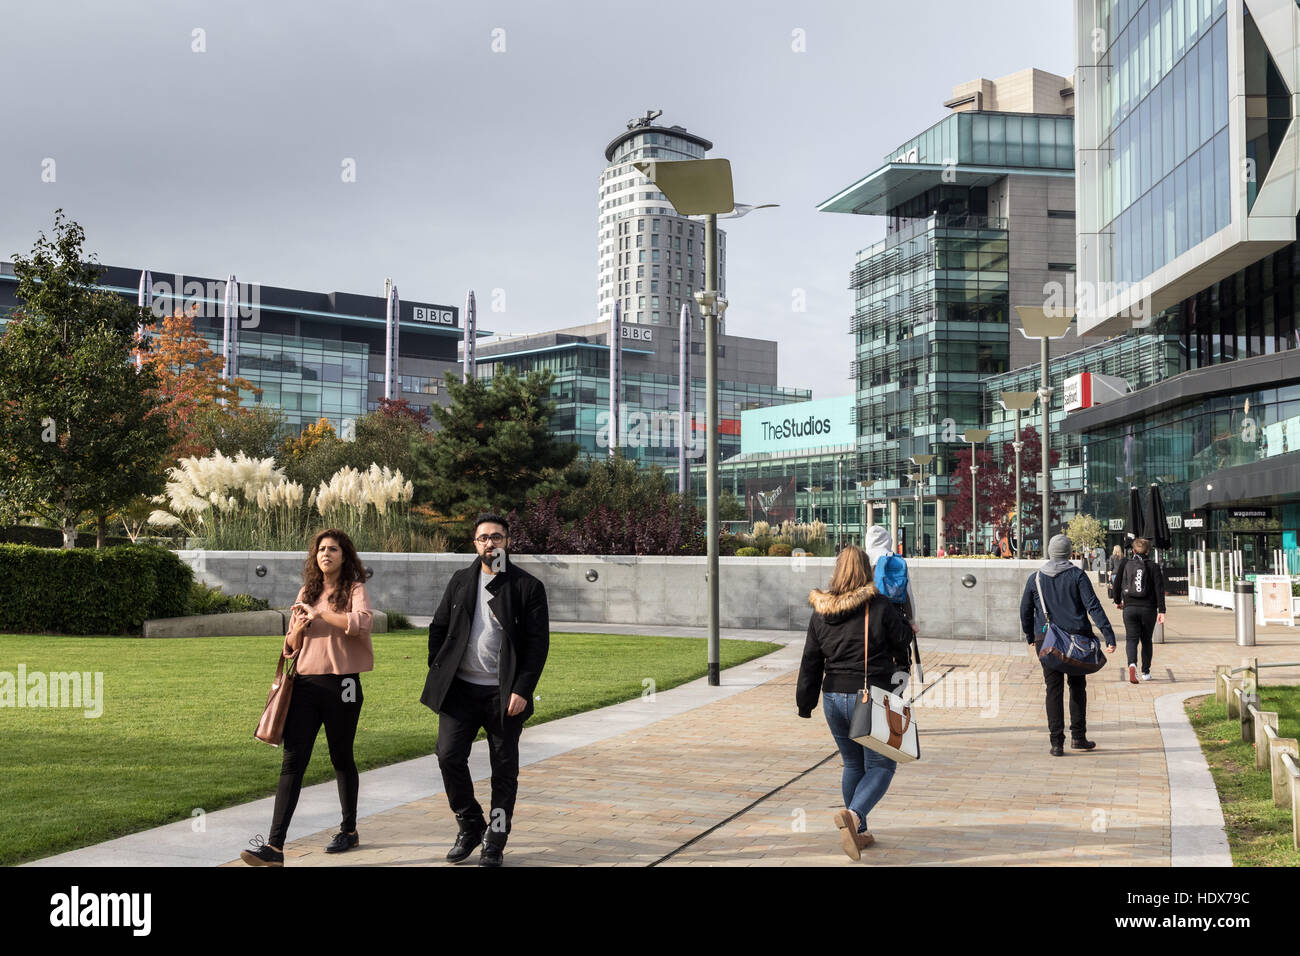 Media City, Salford Quays, Greater Manchester Foto Stock